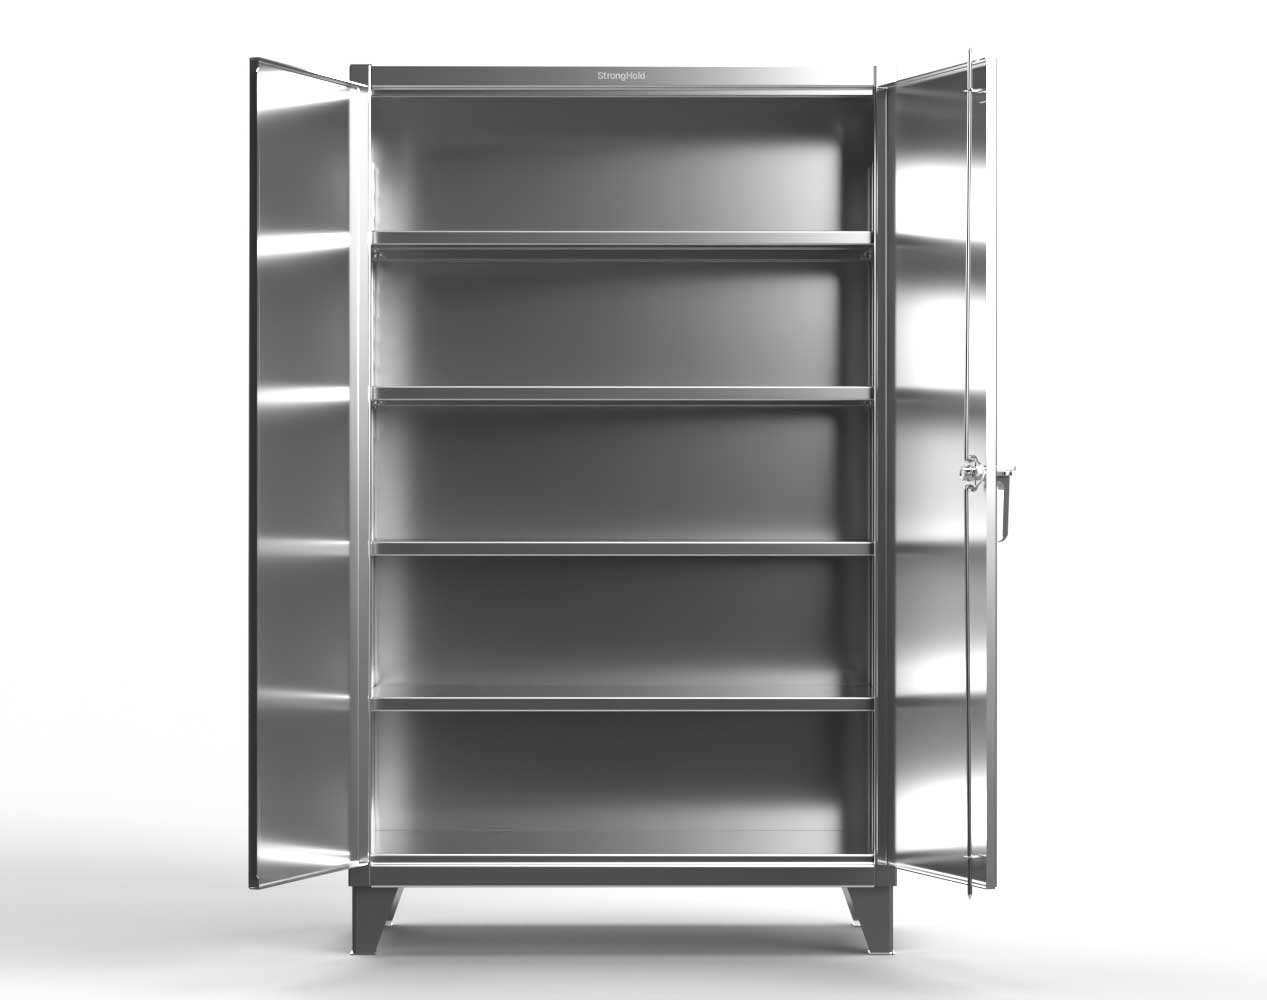 Extreme Duty 12 GA Stainless Steel Cabinet with 4 Shelves - 36 In. W x 20 In. D x 78 In. H